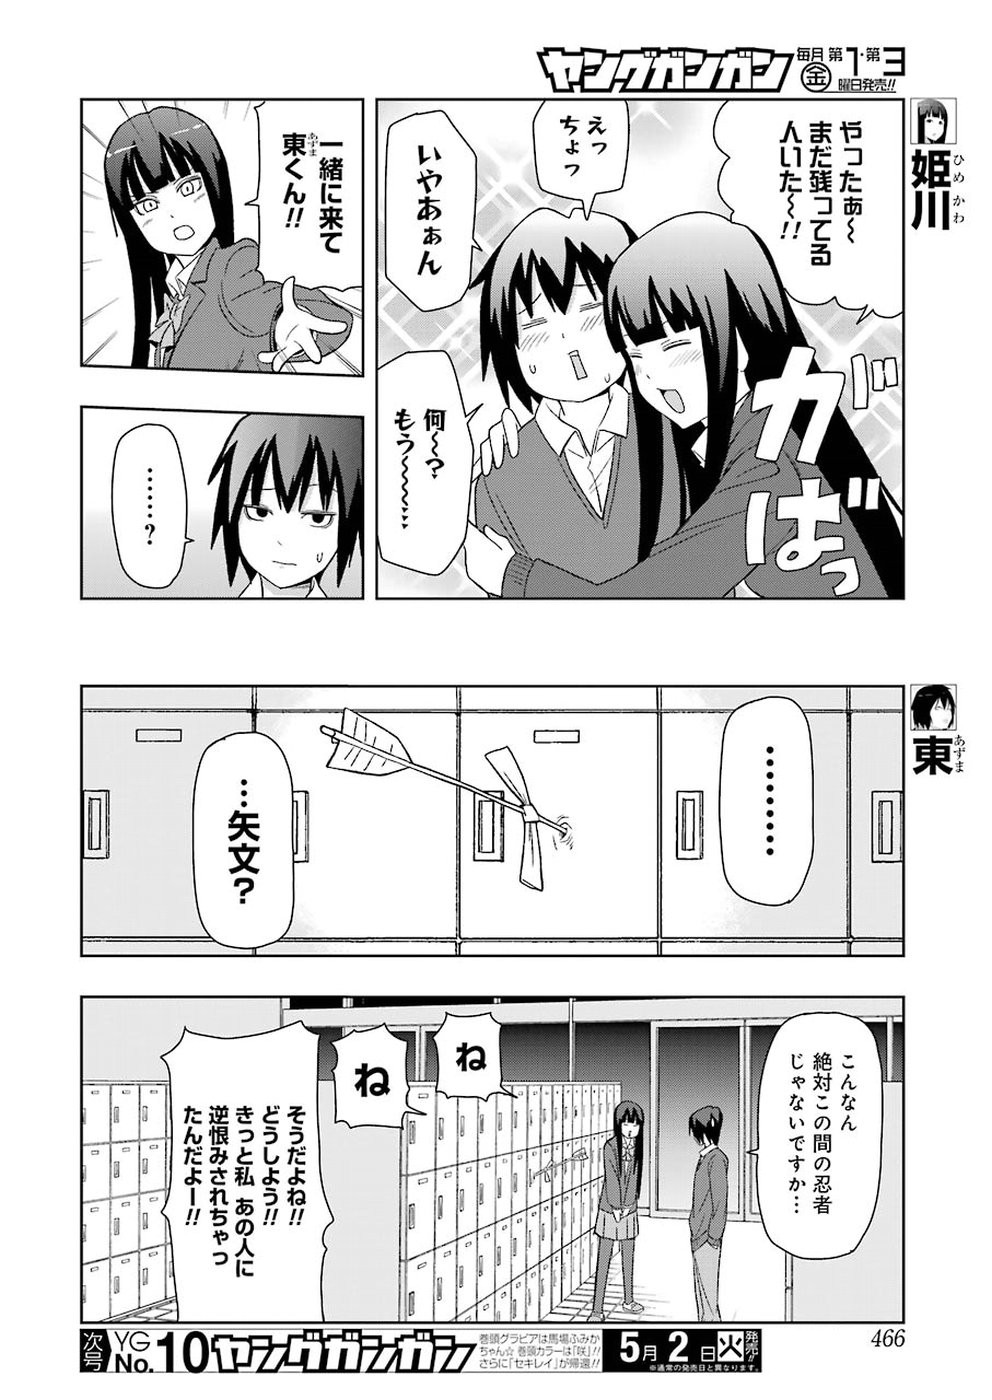 + Tic Nee-san - Chapter 145 - Page 2